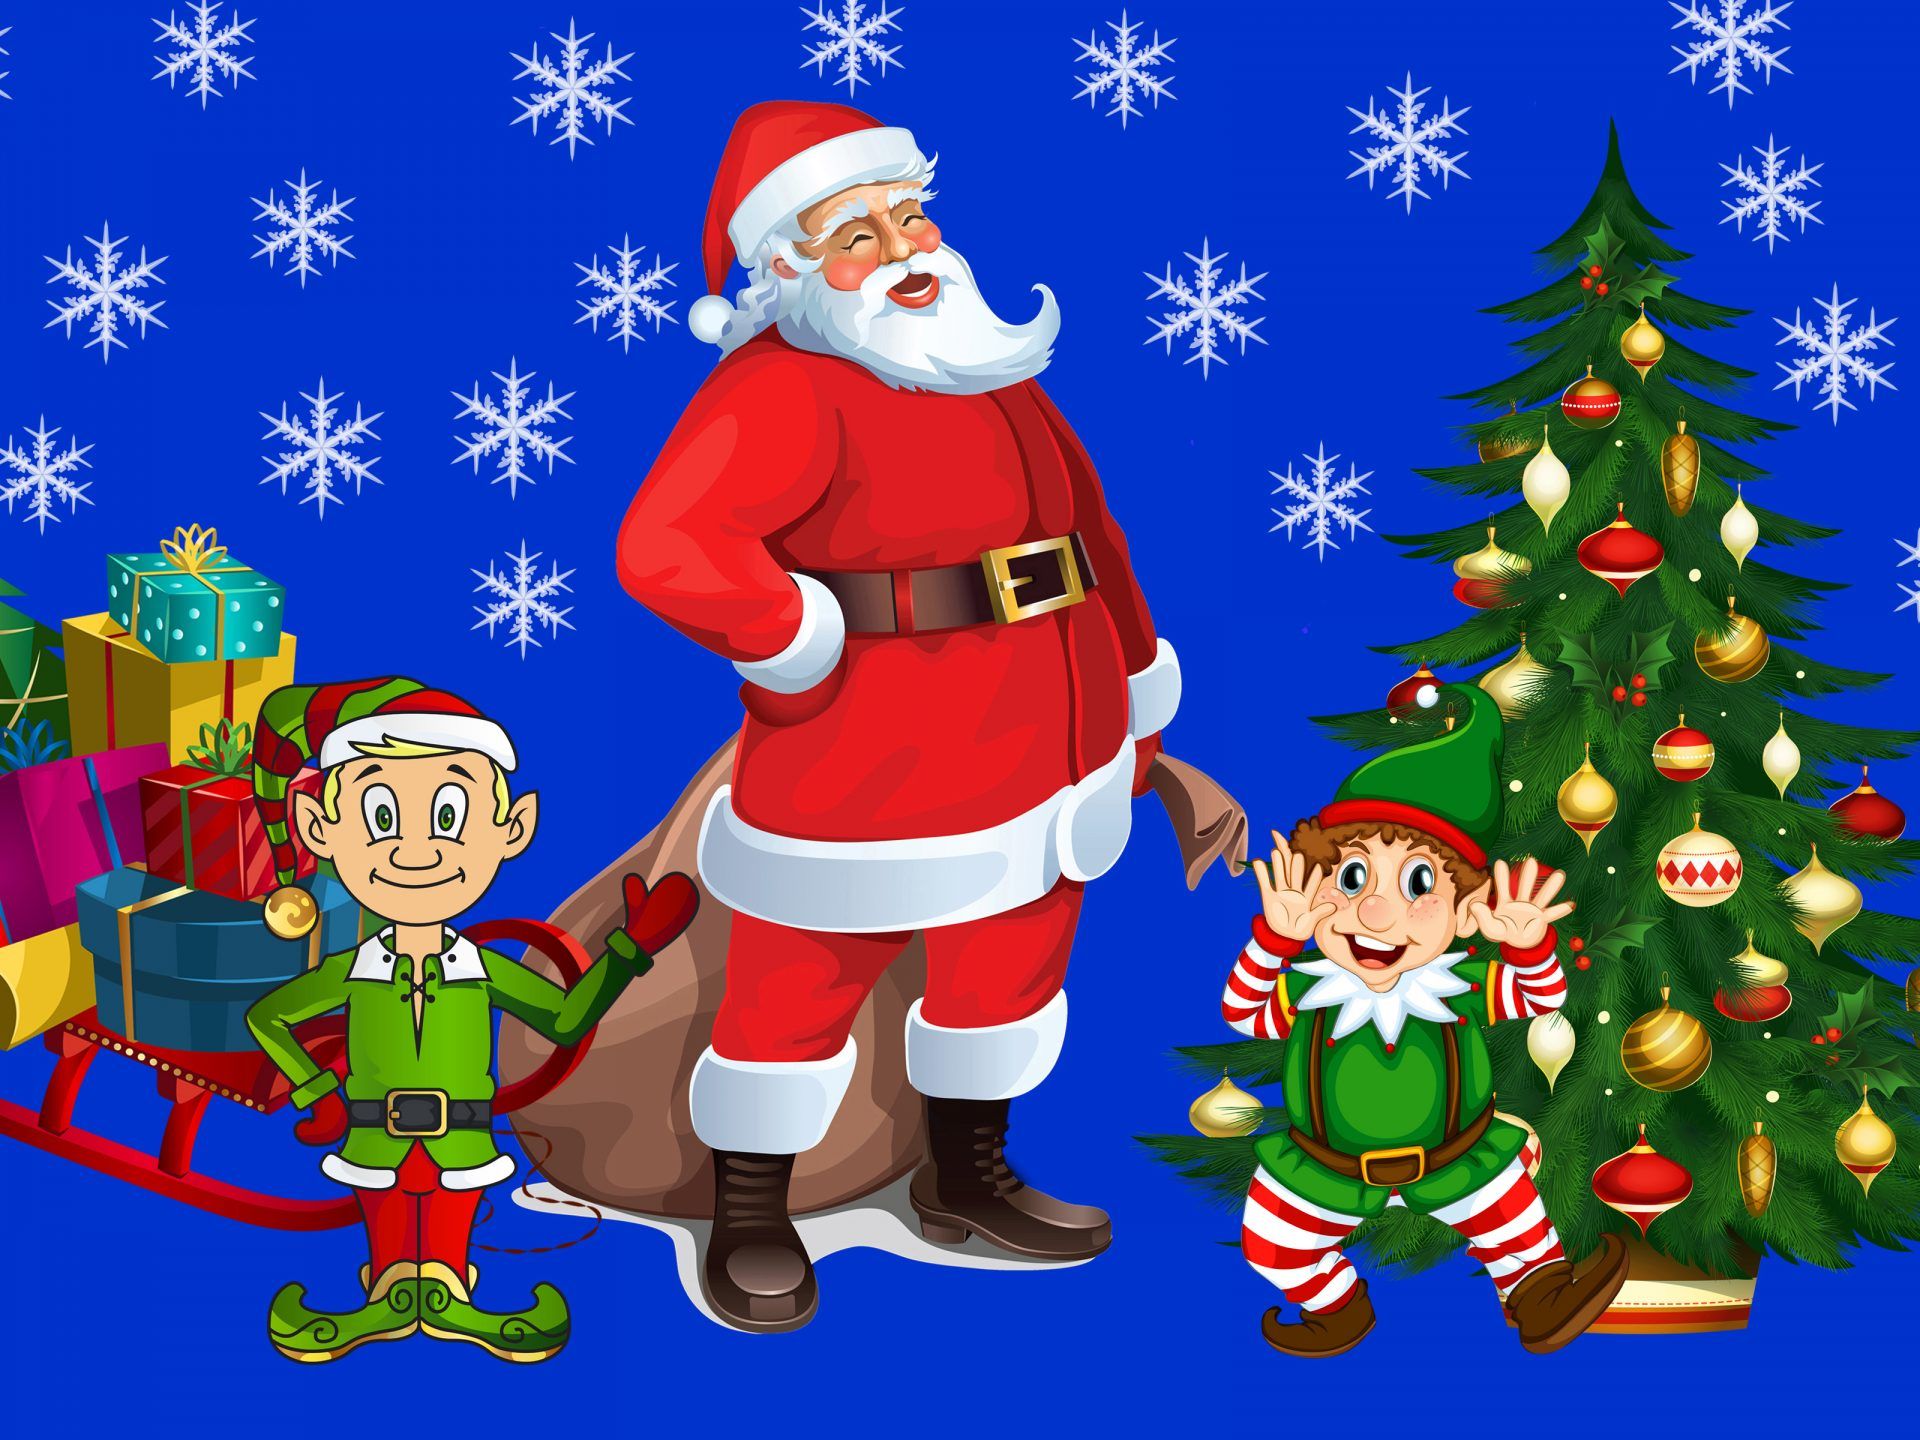 Christmas Tree Hanging Out With Santa Claus Gifts Wallpaper For Desktop Full Screen HD 3840x2400, Wallpaper13.com